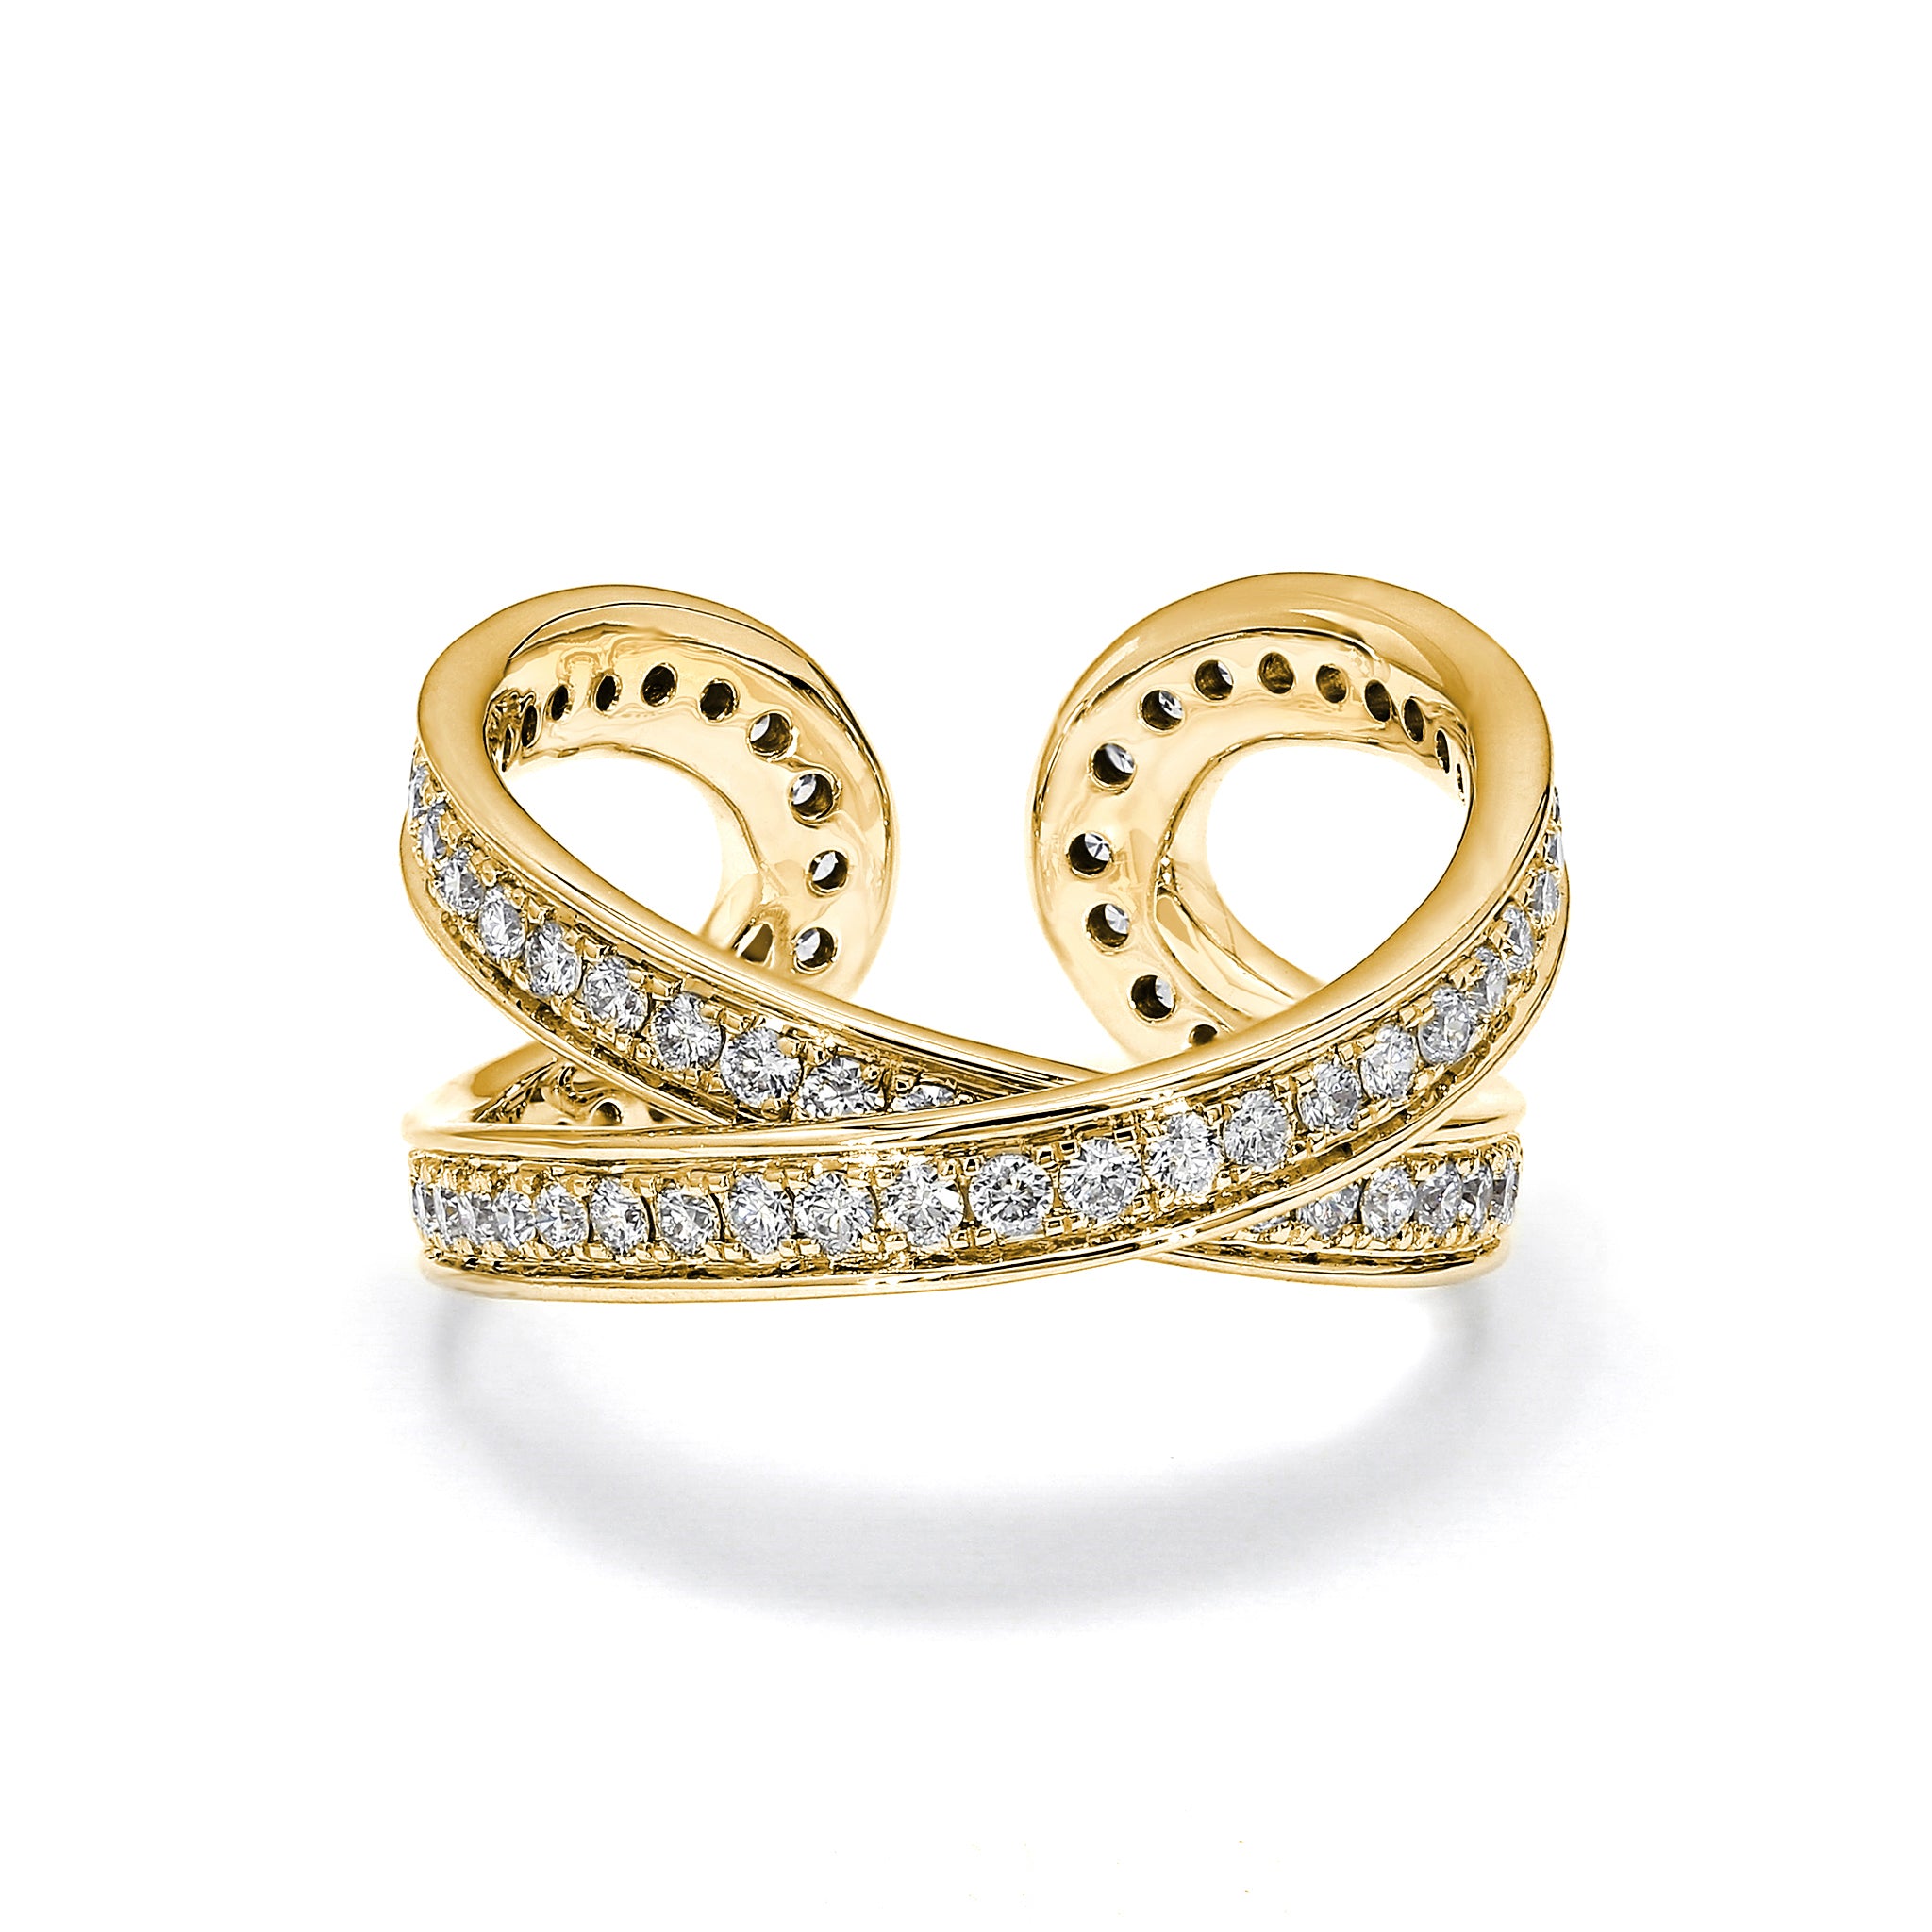 Shimansky - Infinity Classic Pavé Diamond Ring Crafted in 18K Yellow Gold